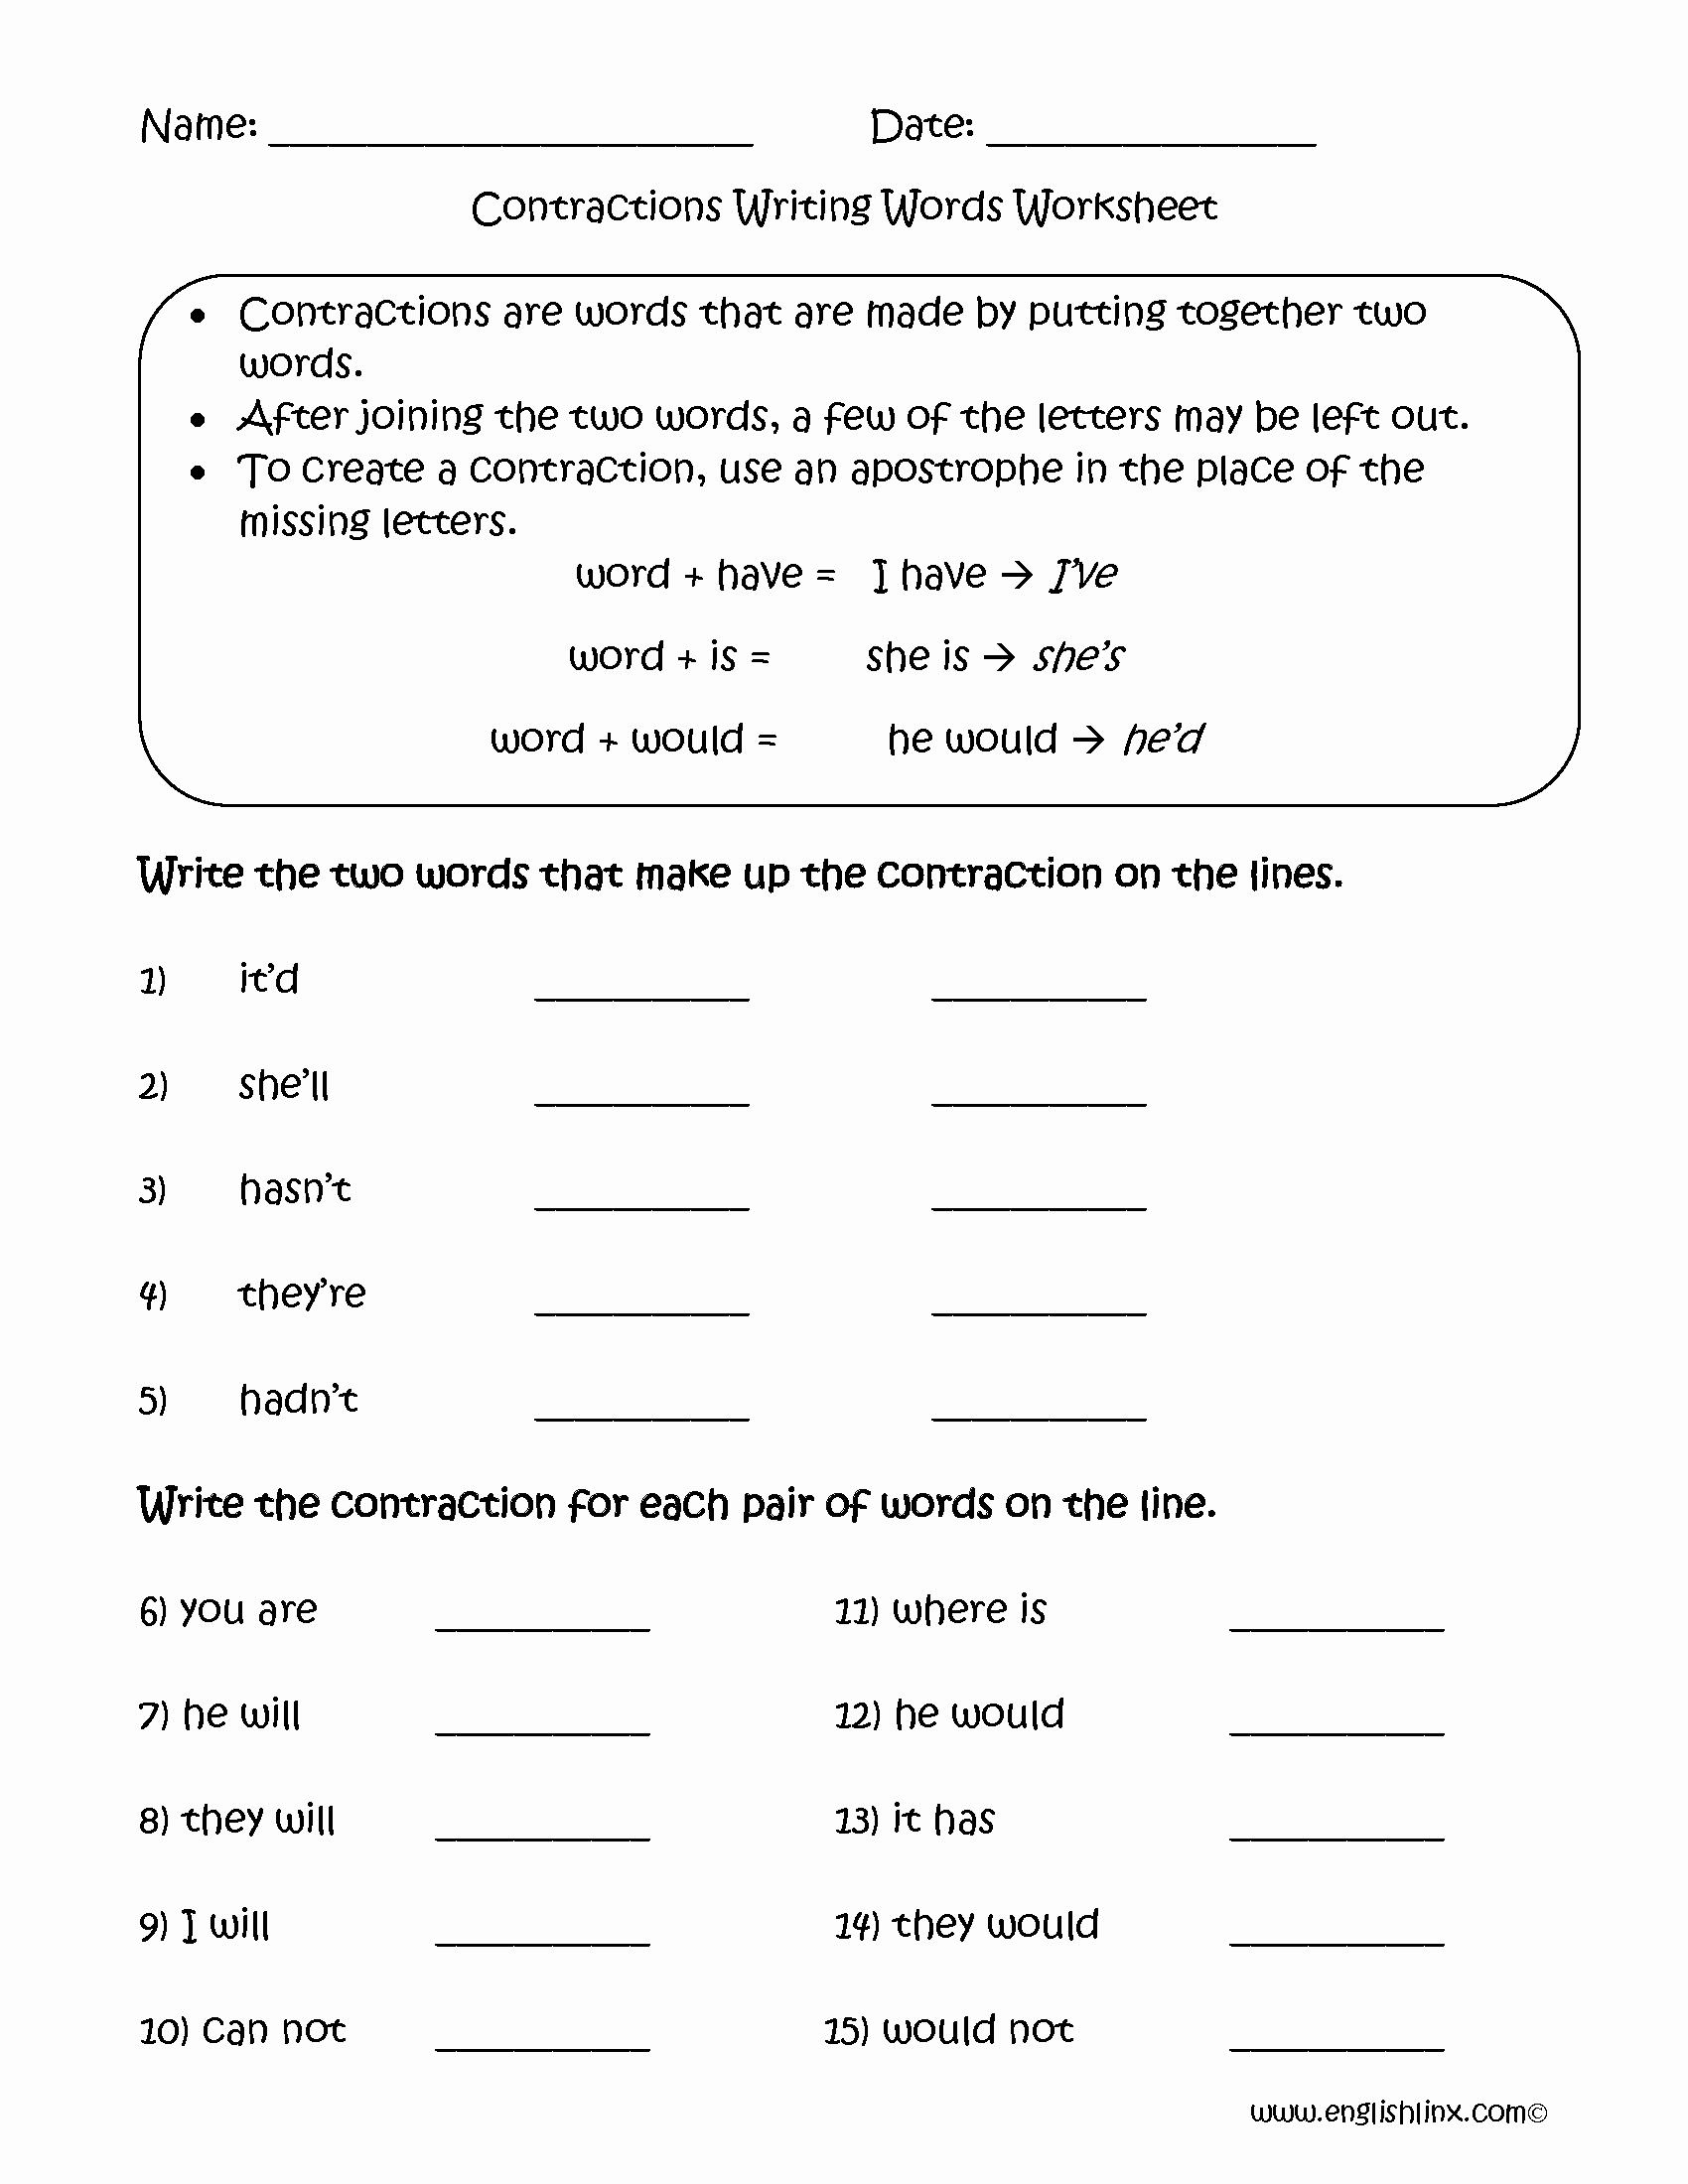 Contractions Worksheet 3rd Grade Inspirational Contractions Writing Words Worksheet